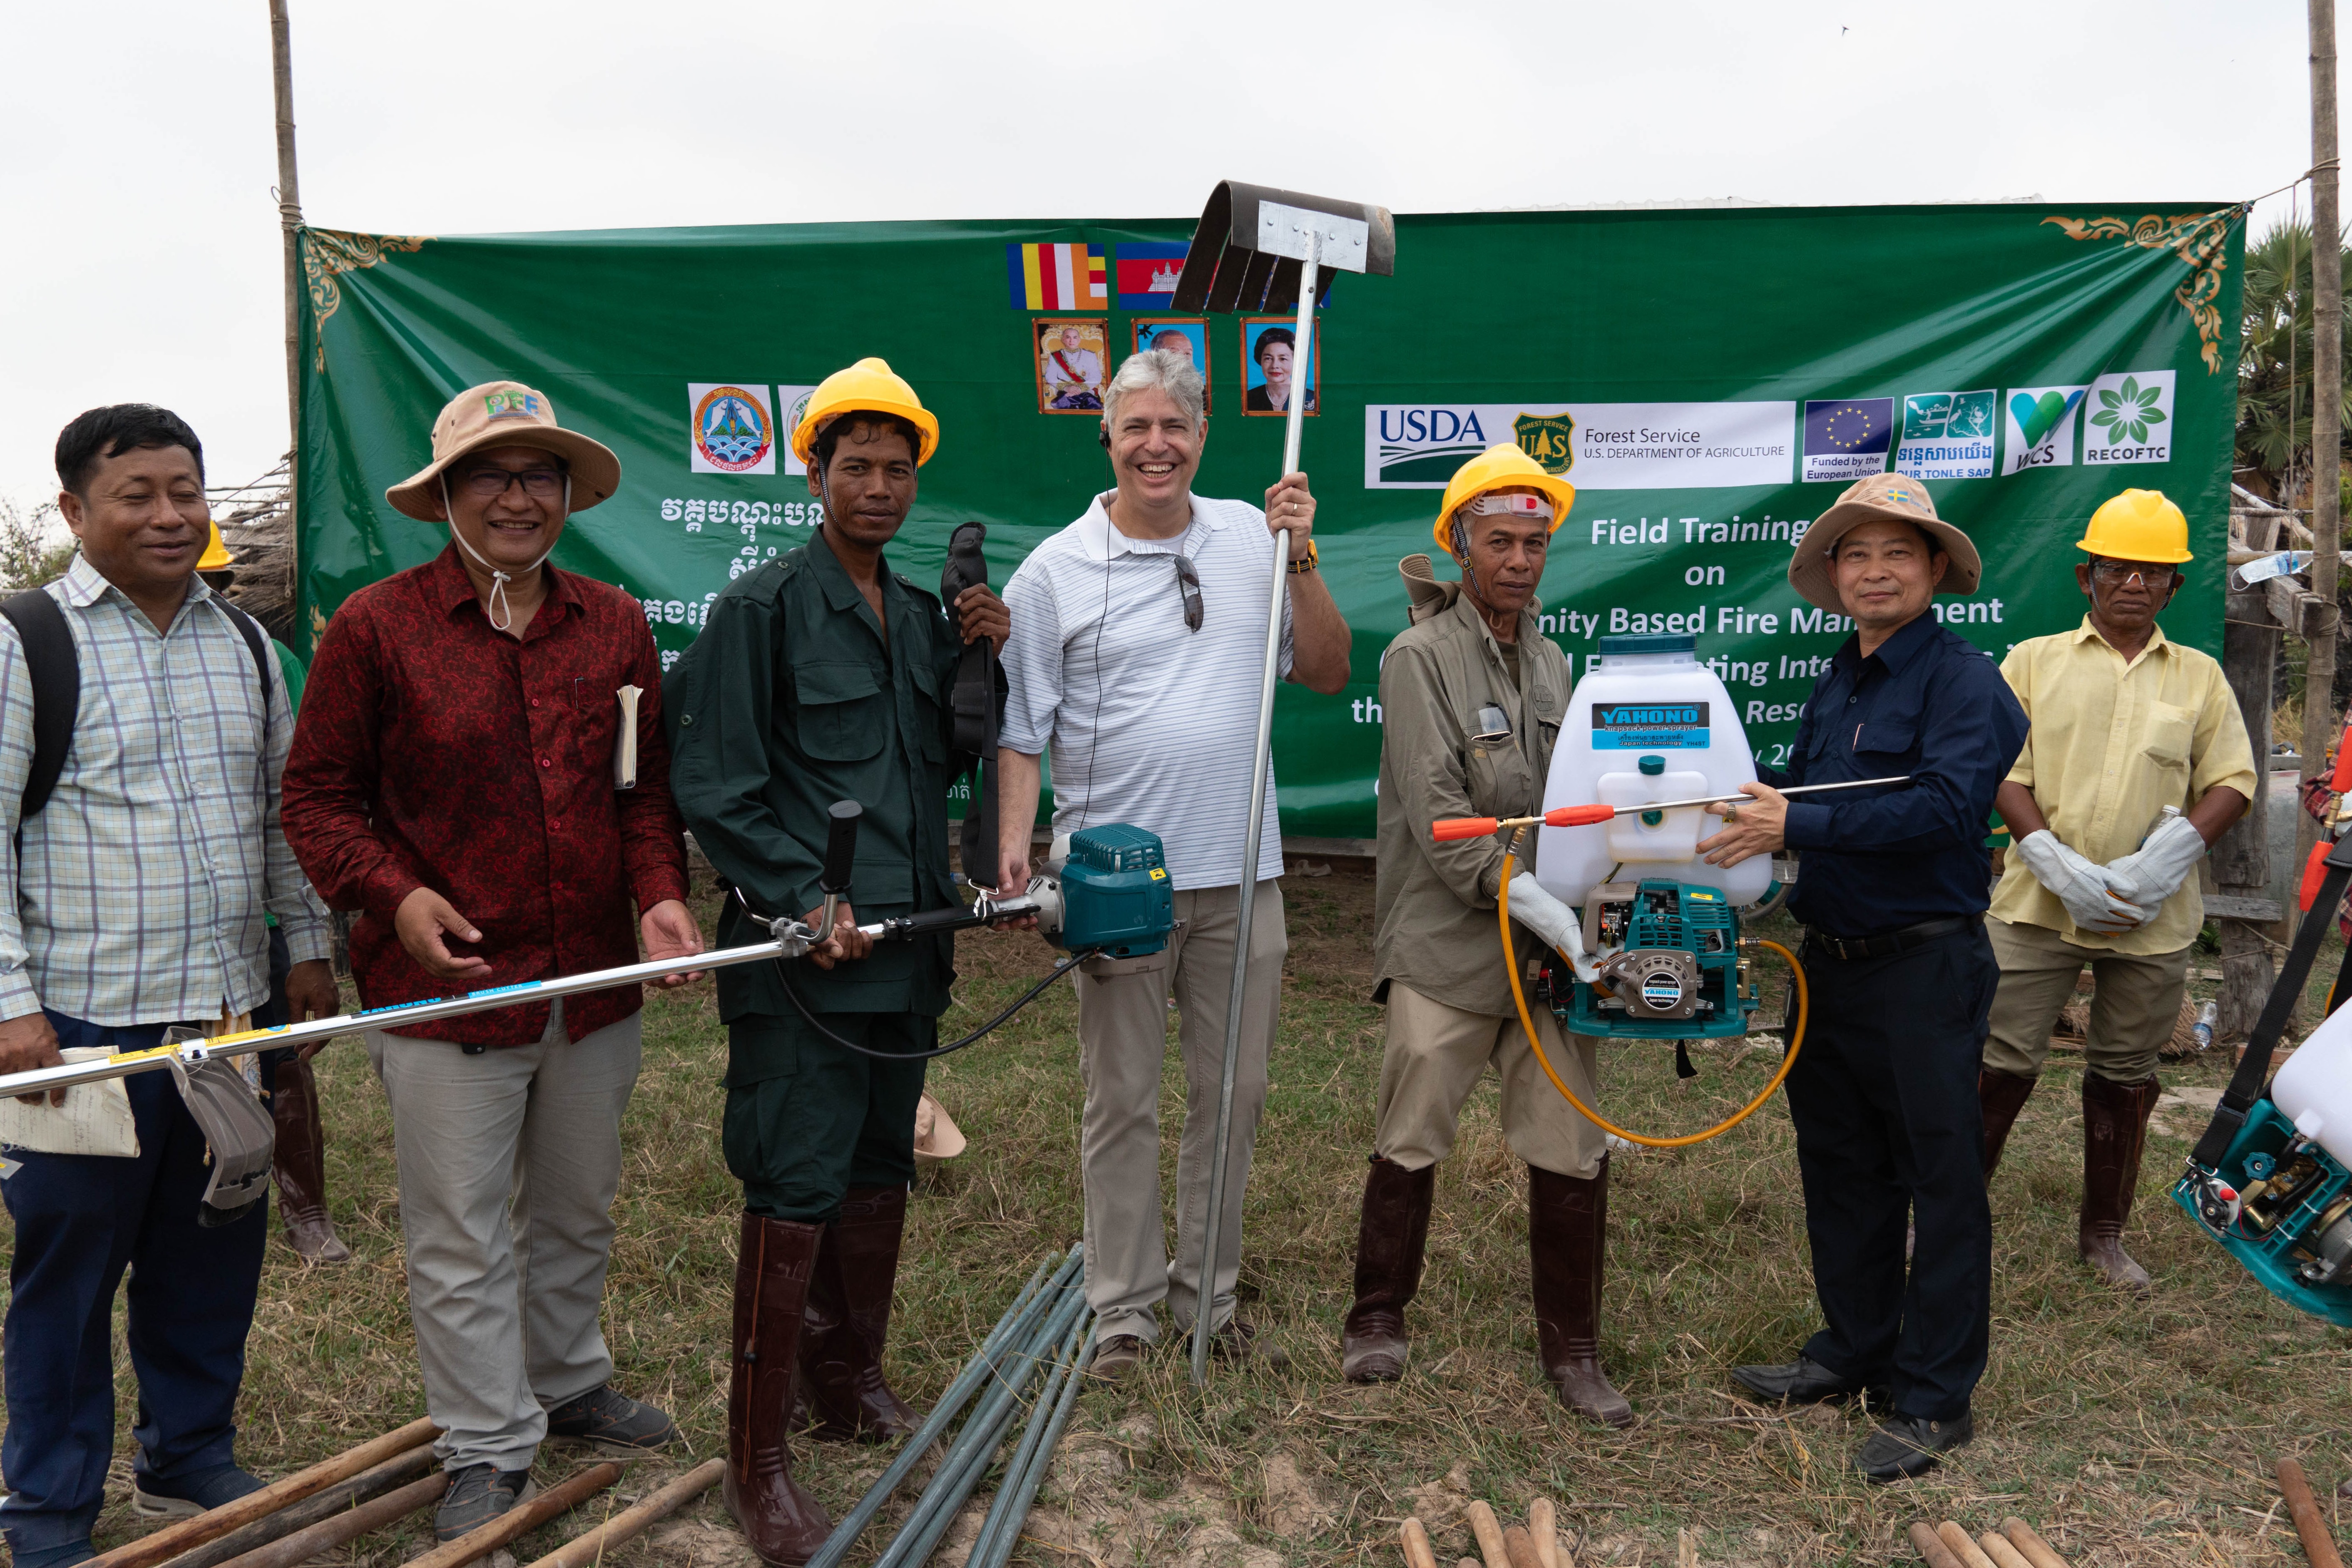 From right: Lay Viseth, Deputy Governor of Pursat Province (second), hands over a backpack sprinkler to Sa Ya, chief of Ou Ta Brok CFi at the field practicum in Ou Ta Brok. David Ganz, RECOFTC executive director; Loun Chan Leng, Secretary of Ou Ta Brok CFi; Chheang Kirivuth, RECOFTC Cambodia’s community forestry partnership coordinator and Samarth March, RECOFTC Cambodia’s field officer are also pictured. Photo by RECOFTC.